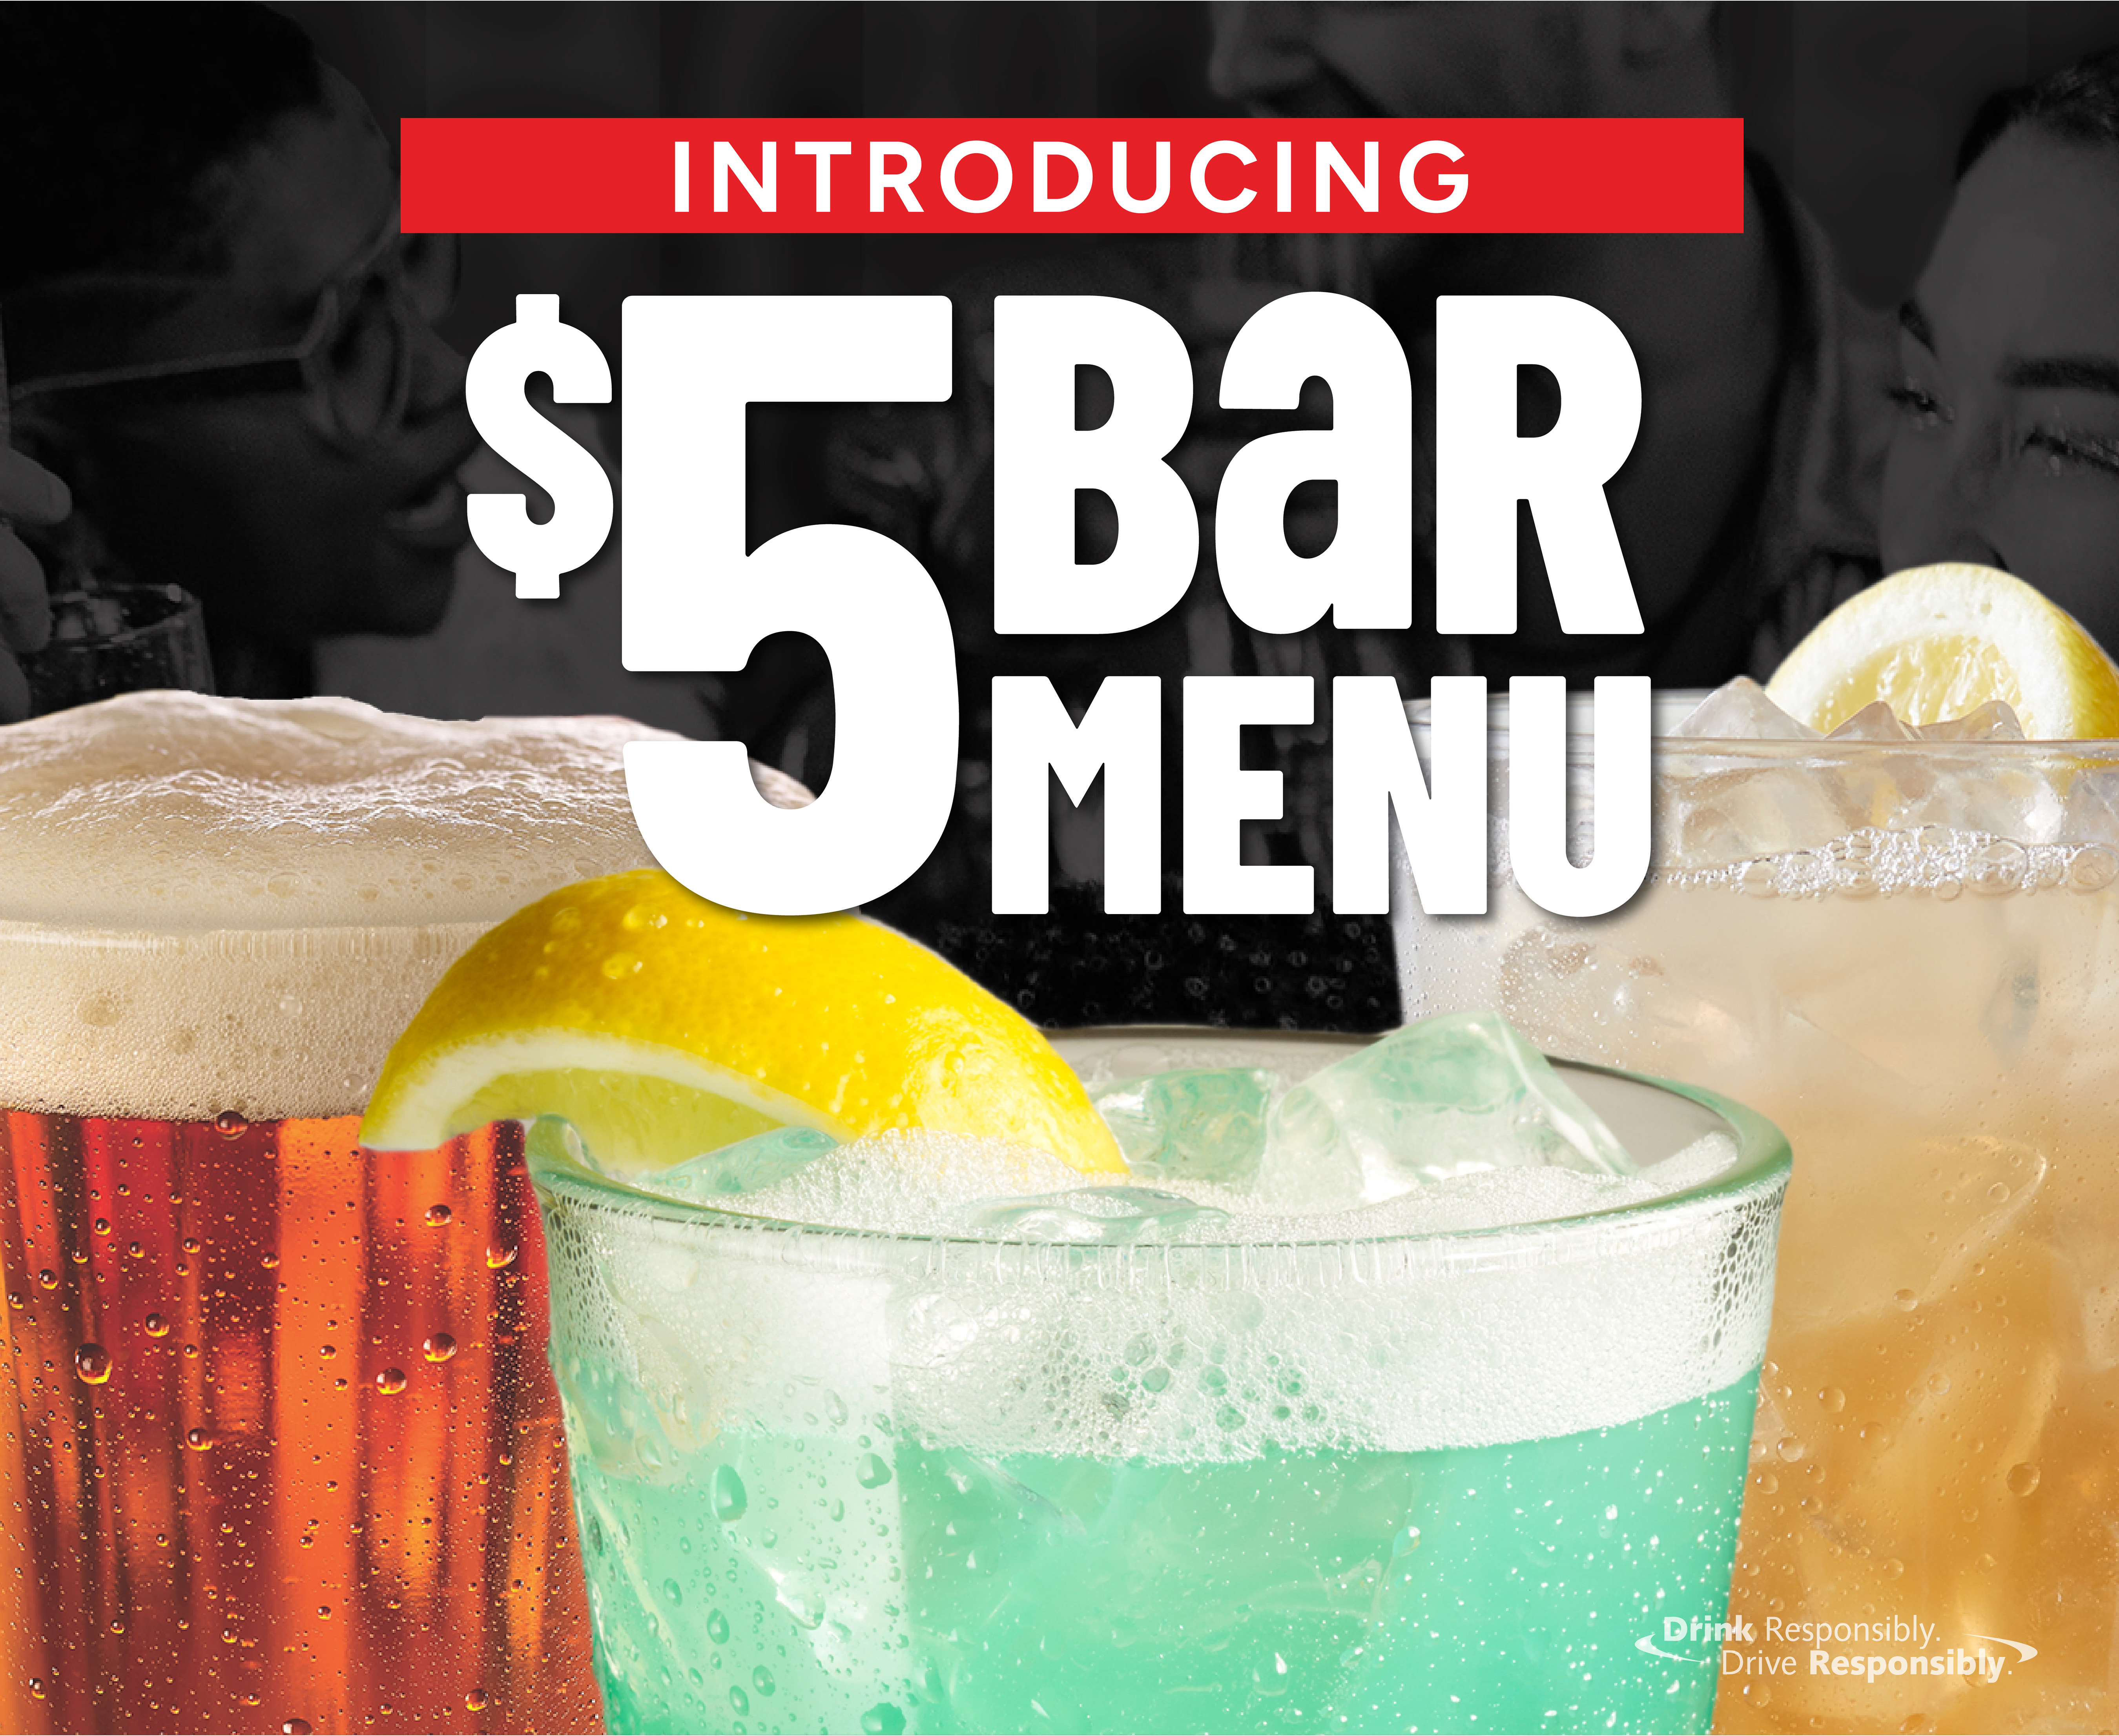 Introducing $5 Bar Menu. 
Our all NEW Happy Hour is here. Premium cocktail selections for just $5. Whether it's post-work relaxation or grabbing a drink with friends, we've got you. 

Dine-in only. At participating locations only. Hours and times may vary by location. Drink Responsibly. Don't Drink and Drive.